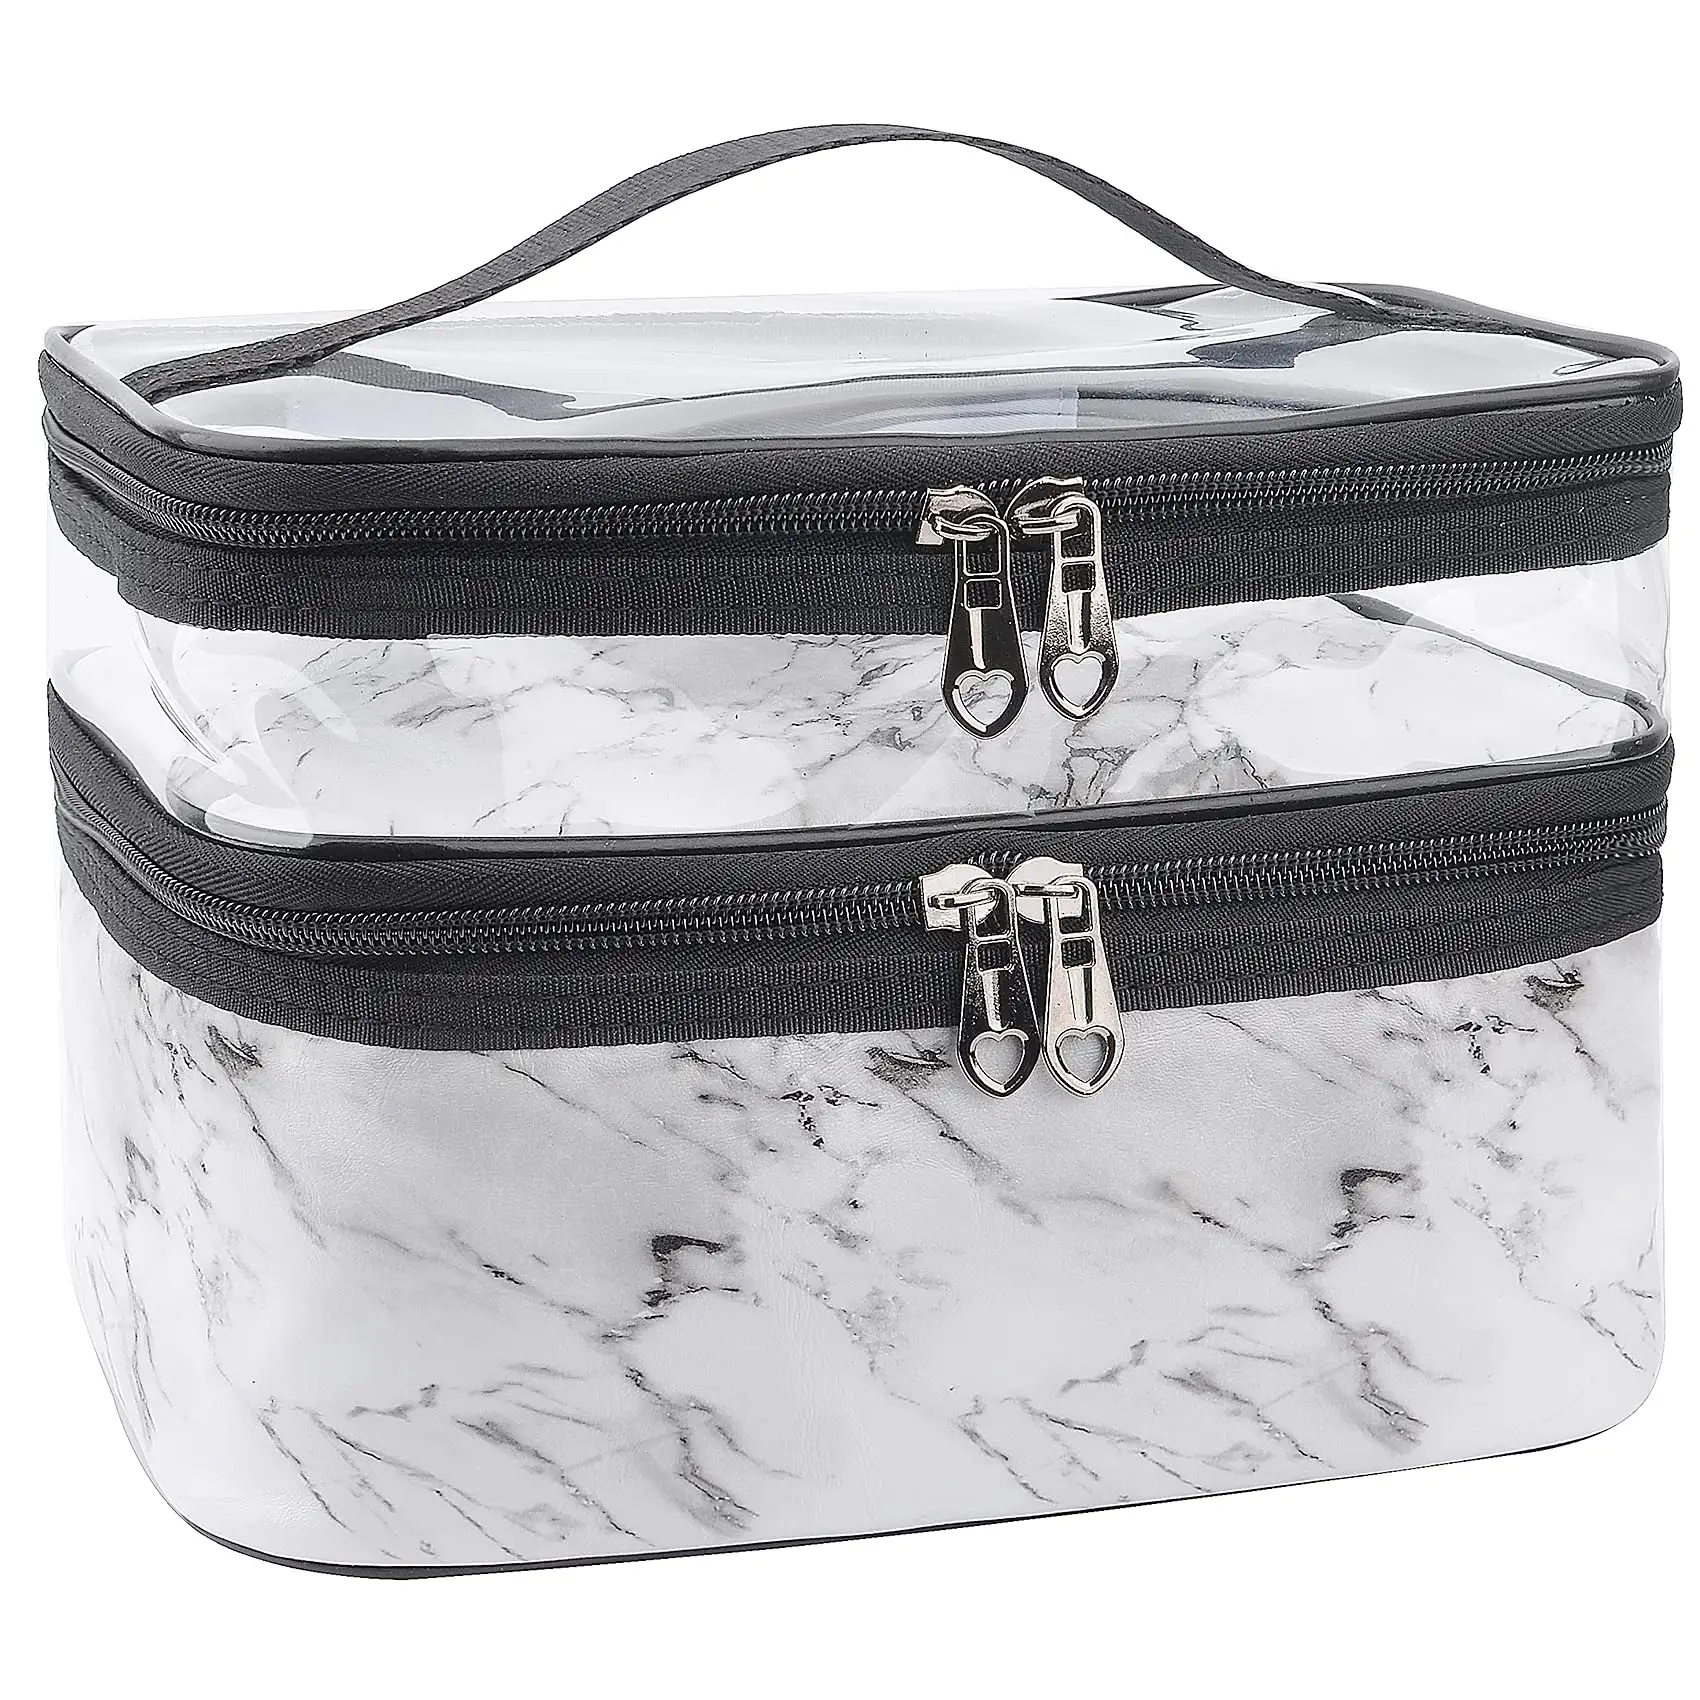 Hot Sales Tiktok Makeup Bags Double layer Travel Cosmetic Cases Make up Organizer Toiletry Bags